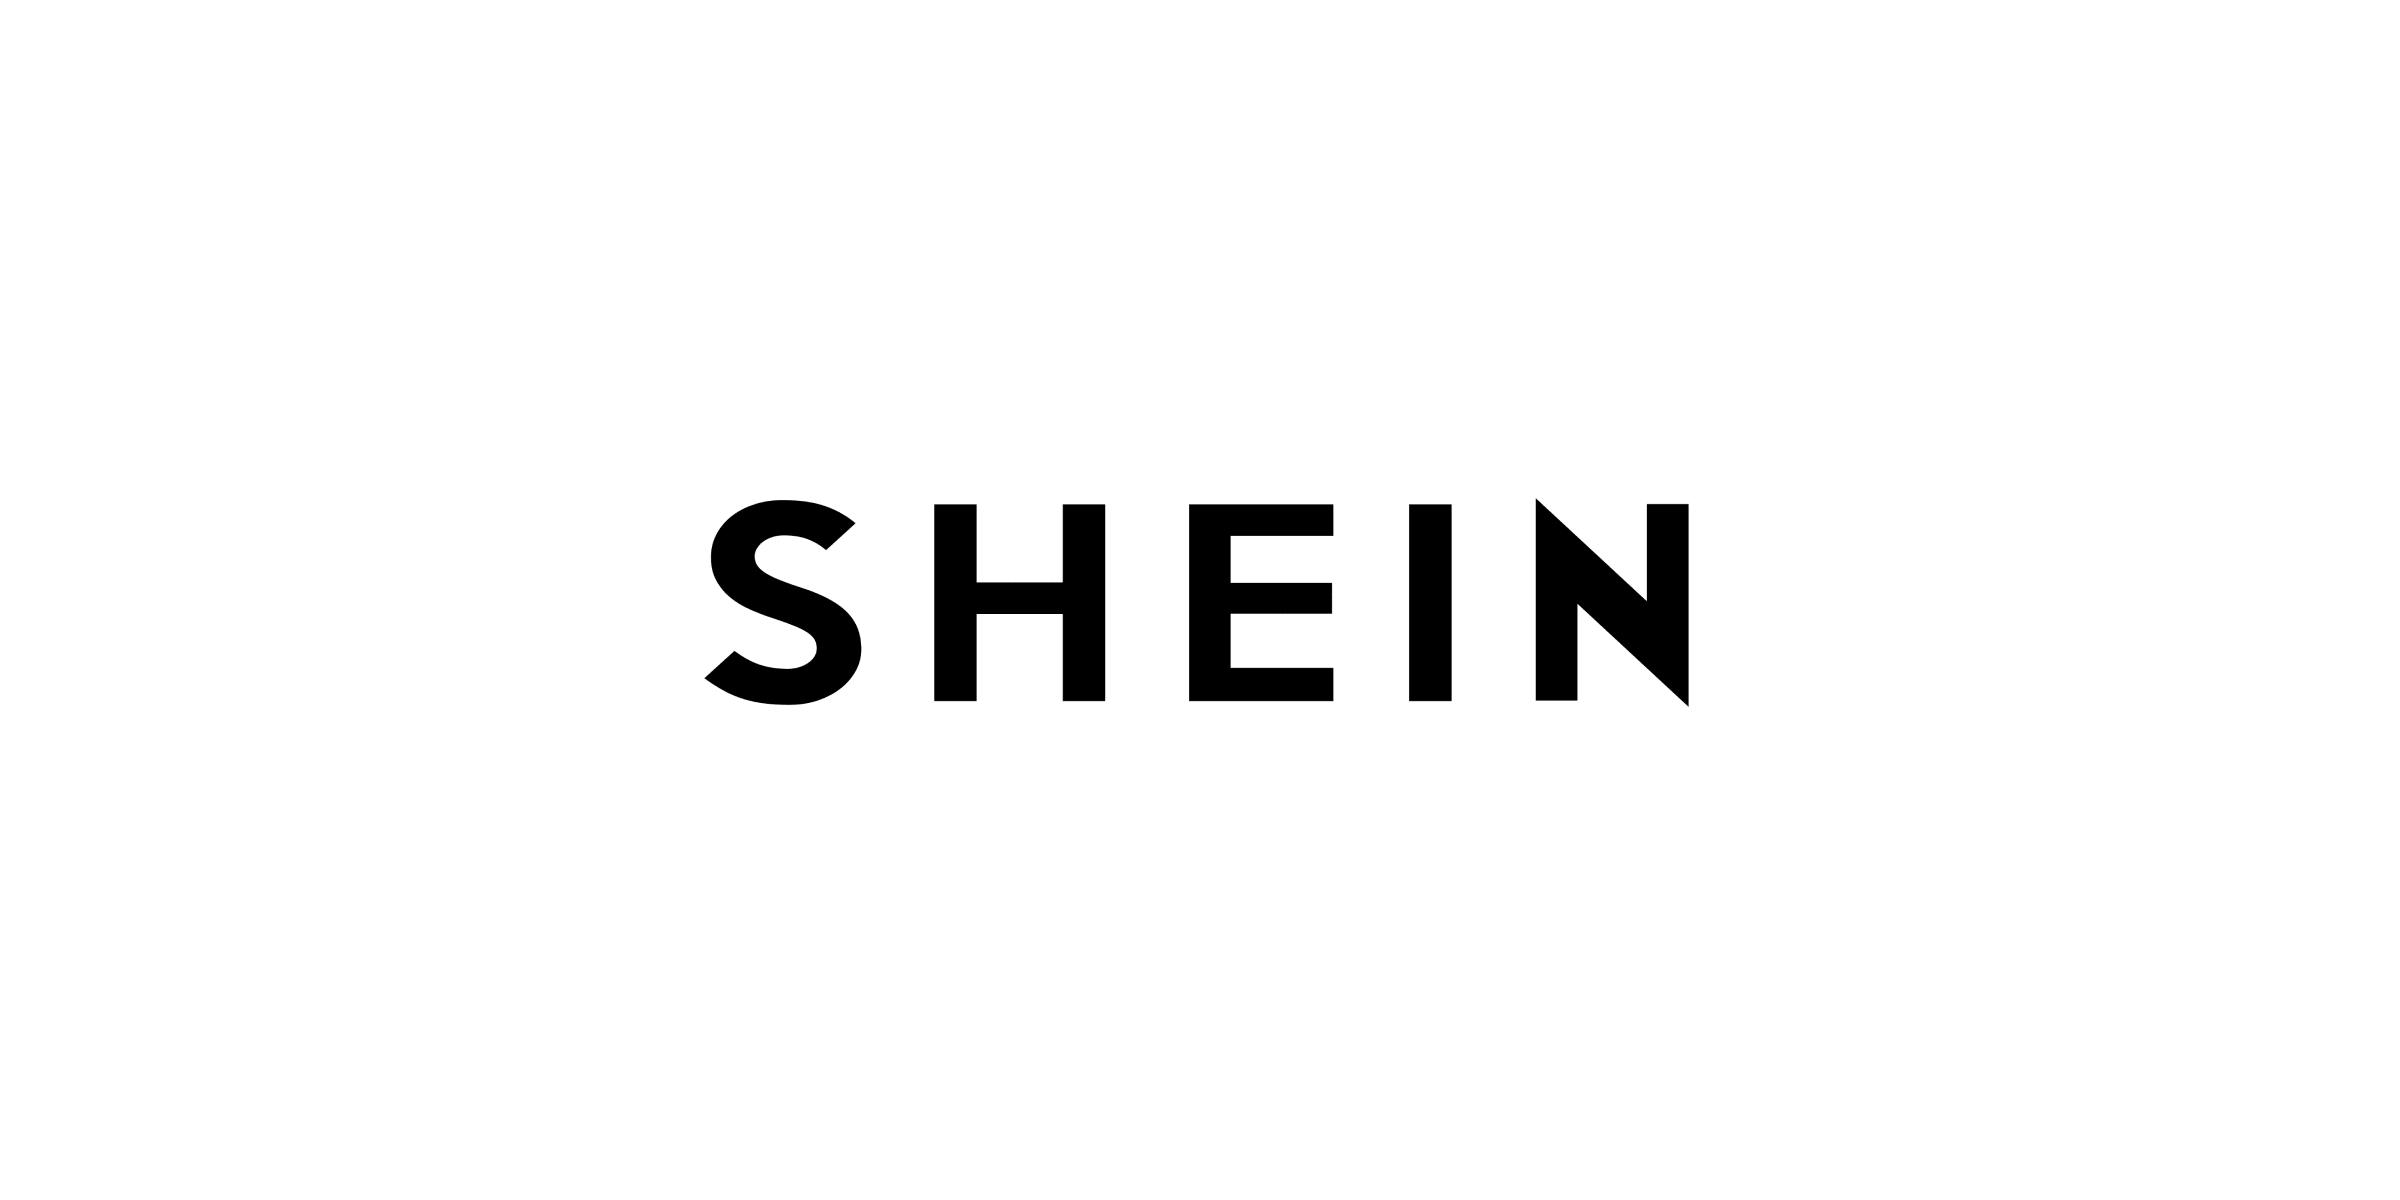 Shein will launch a design competition